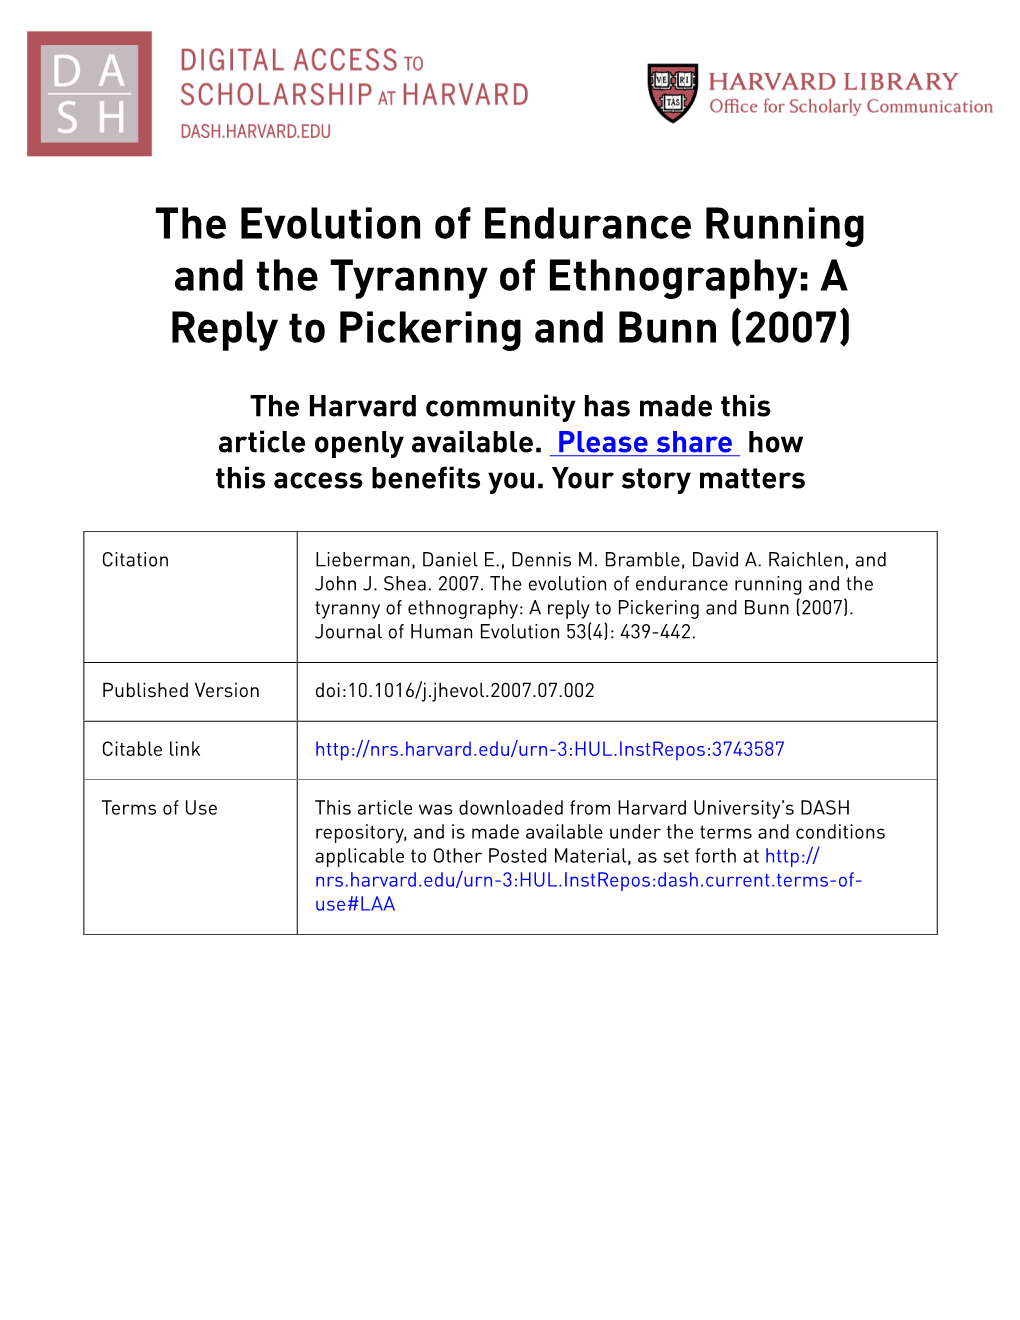 The Evolution of Endurance Running and the Tyranny of Ethnography: a Reply to Pickering and Bunn (2007)